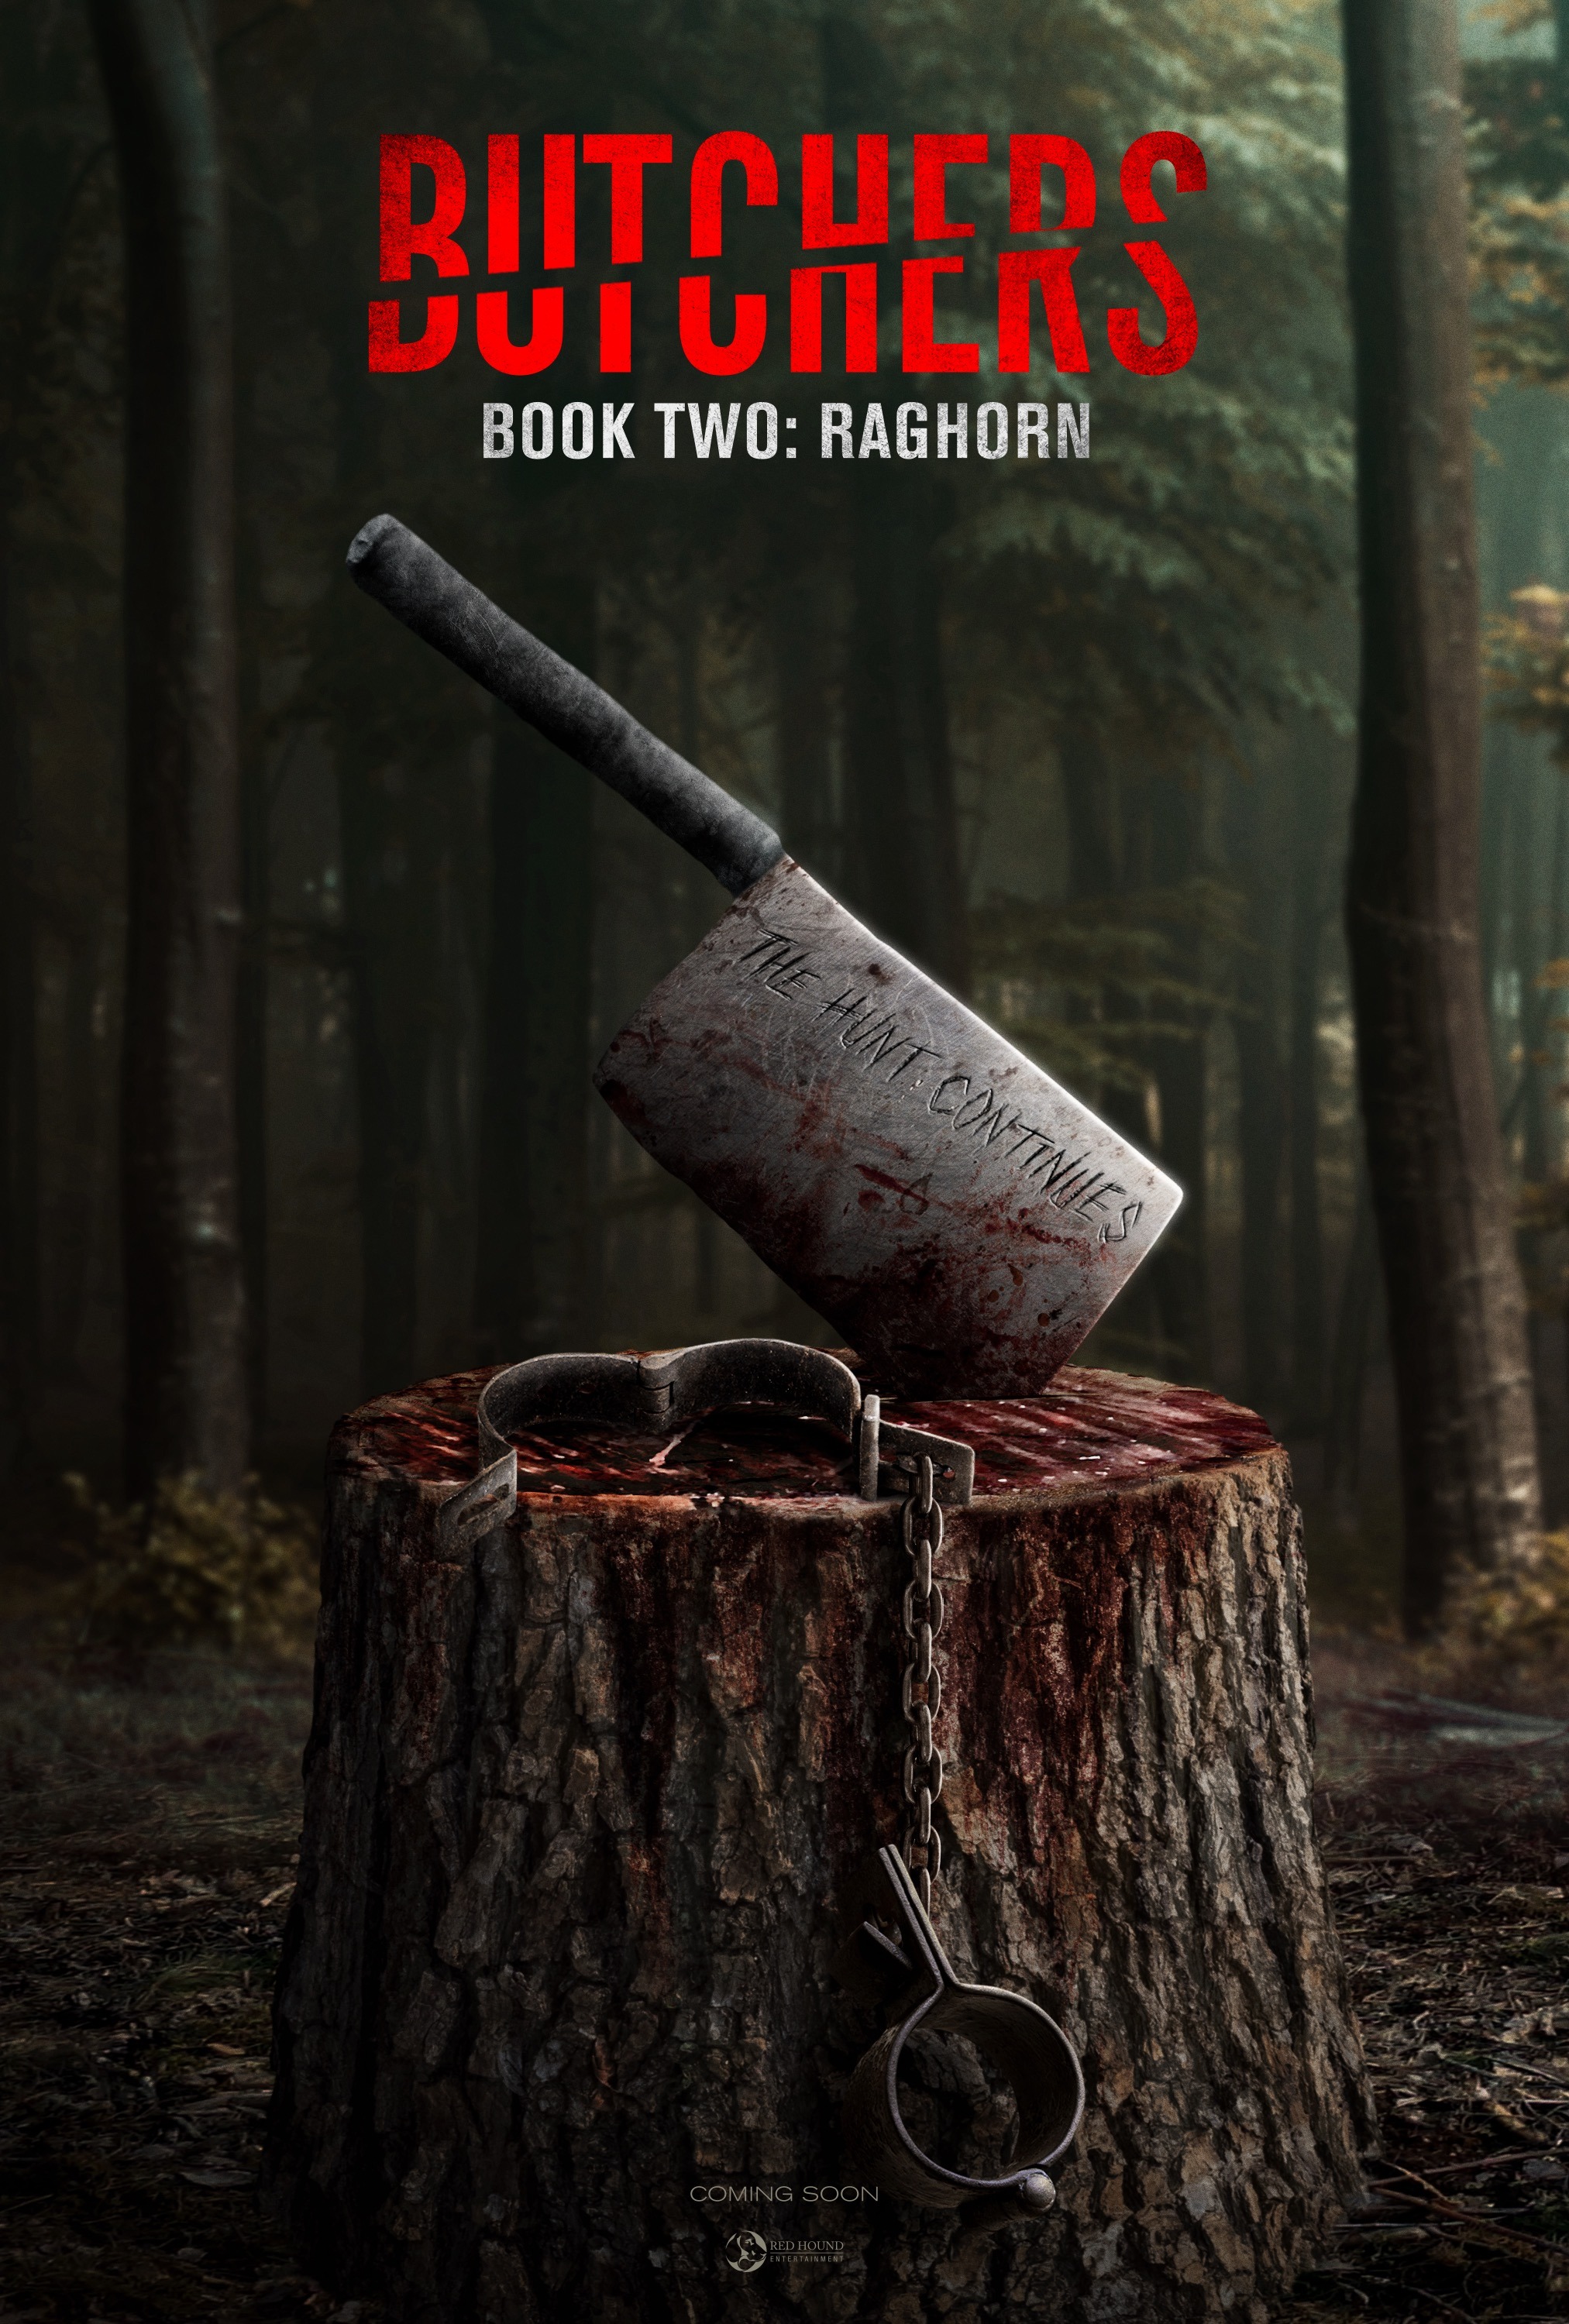 Mega Sized Movie Poster Image for Butchers Book Two: Raghorn 